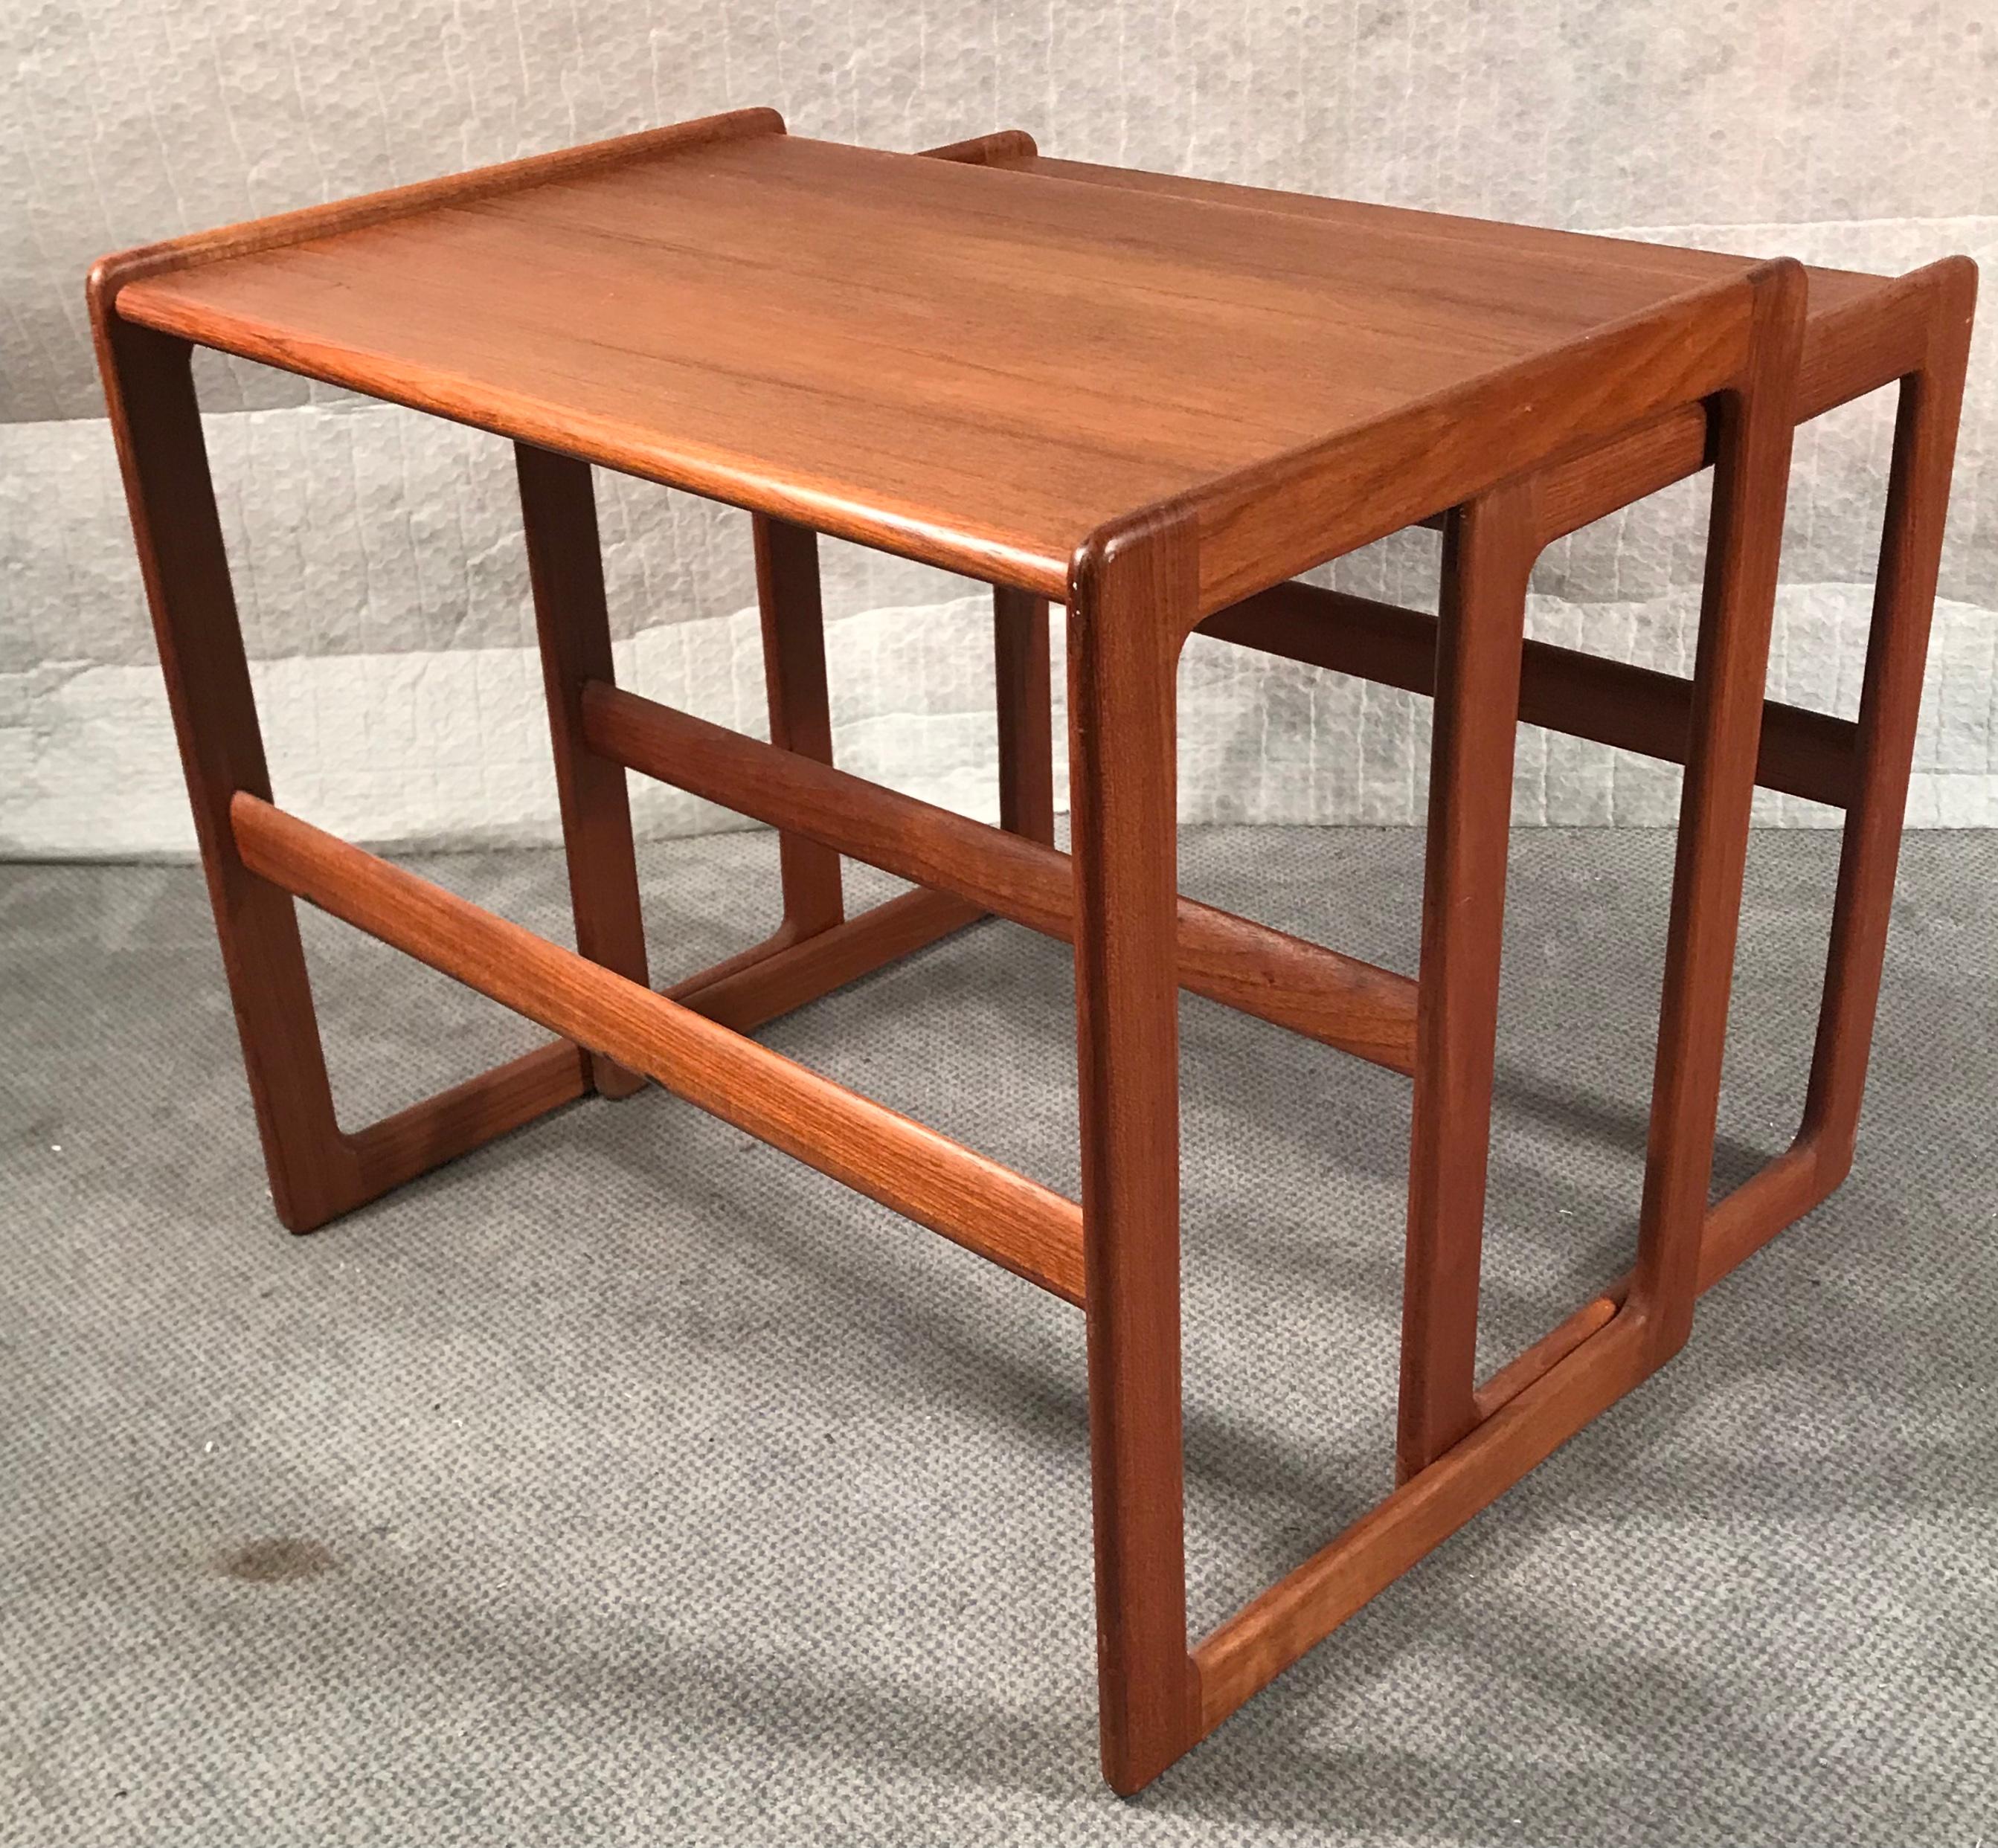 Two Original Mid-Century Nesting Tables by Morgen-Kohl, Denmark, 1960's In Good Condition For Sale In Belmont, MA